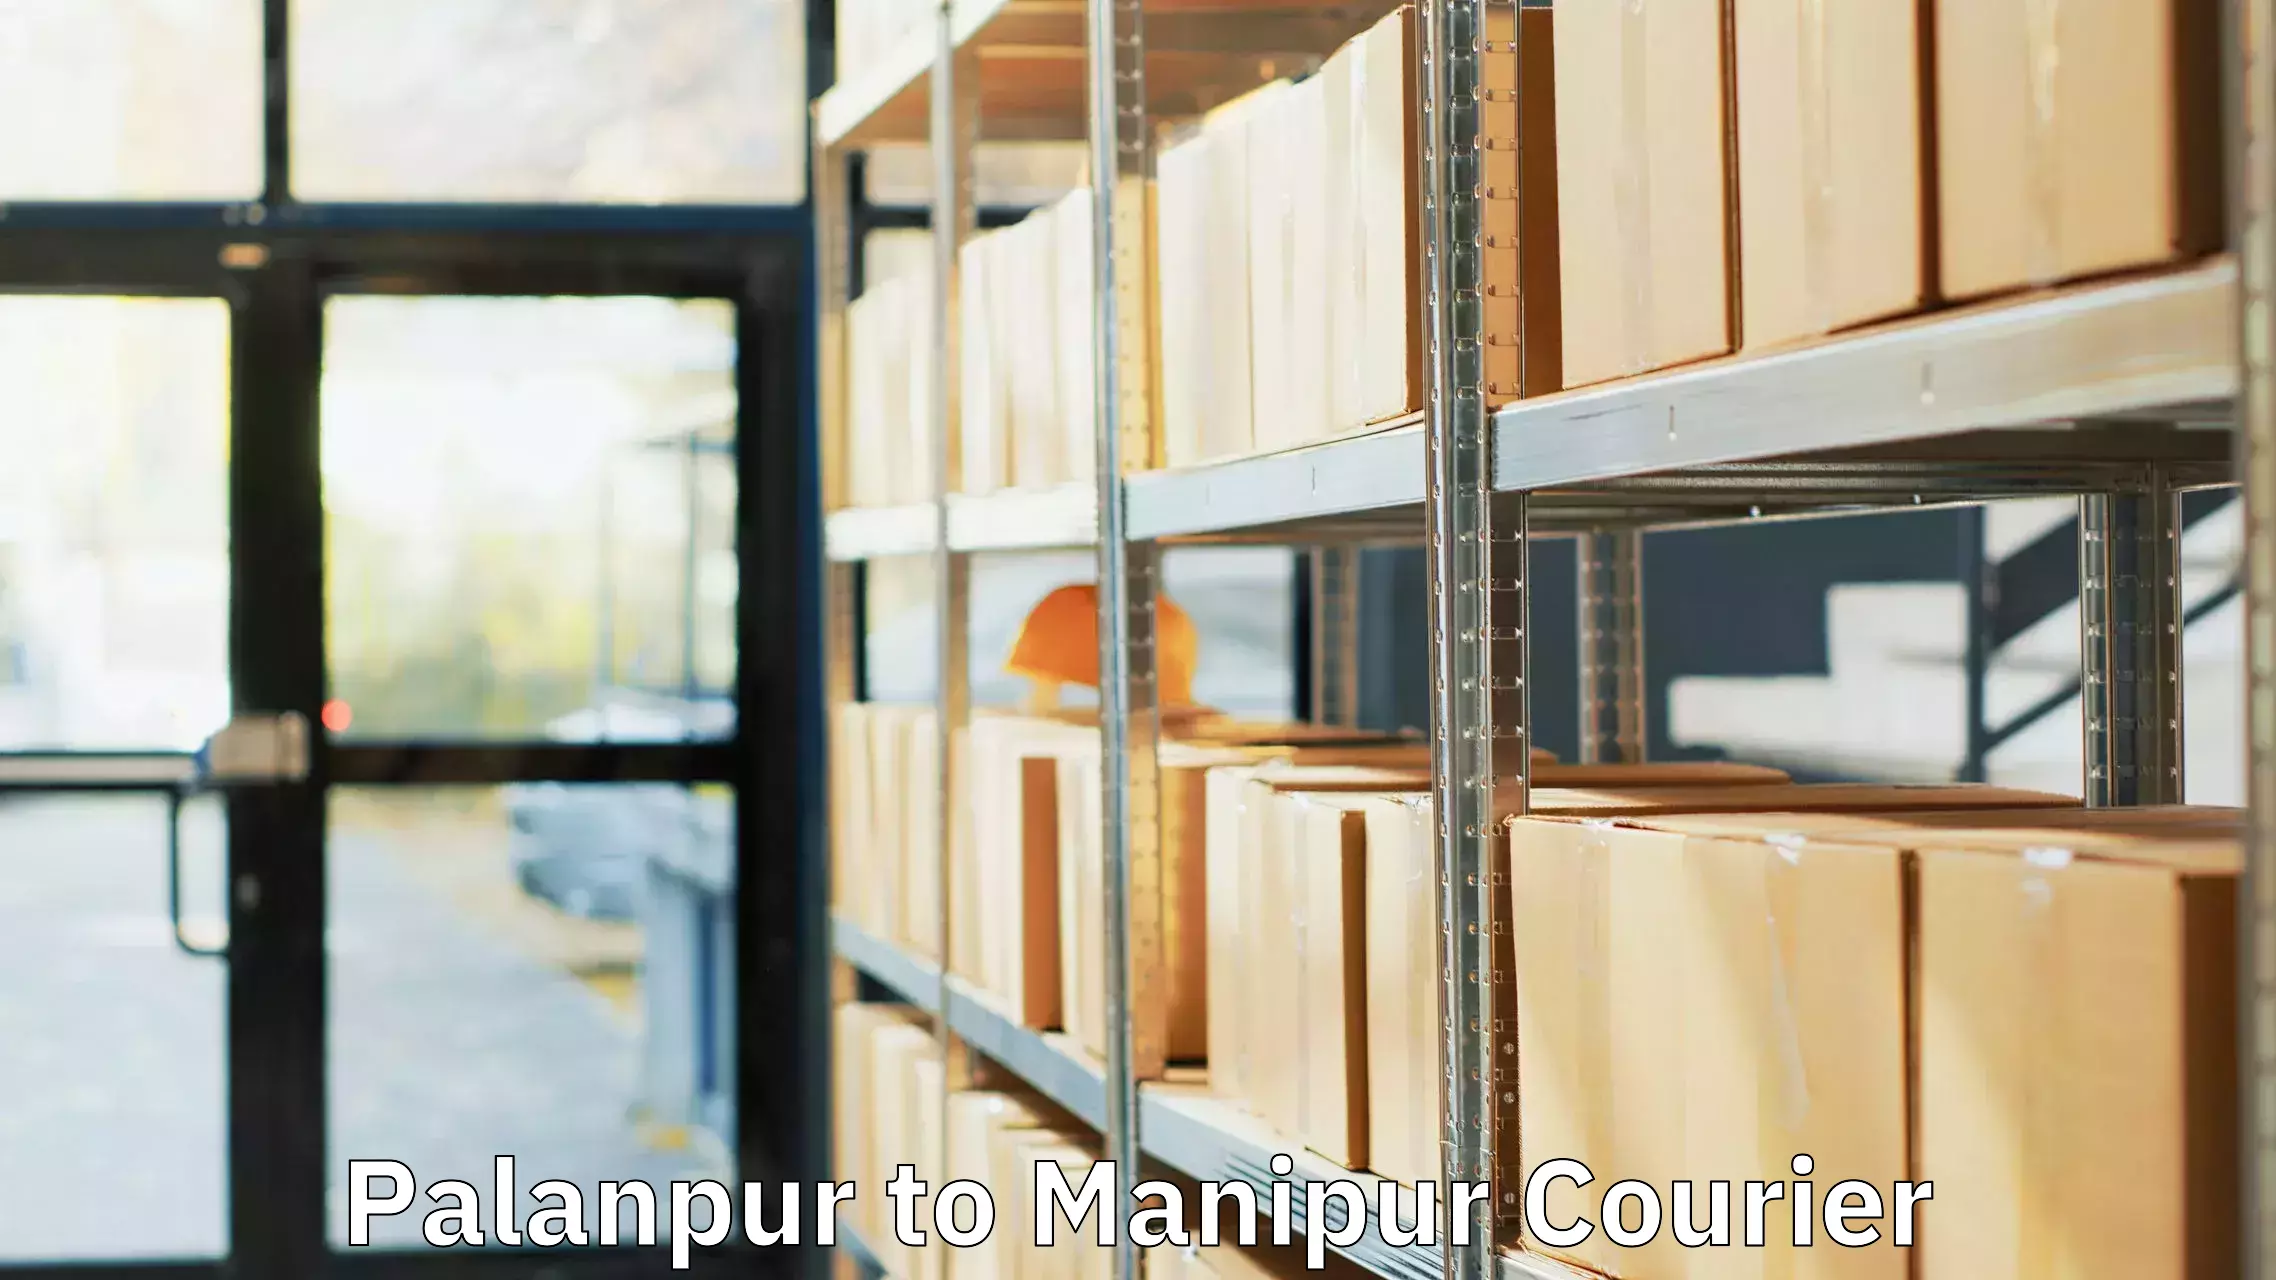 Baggage transport network Palanpur to Manipur